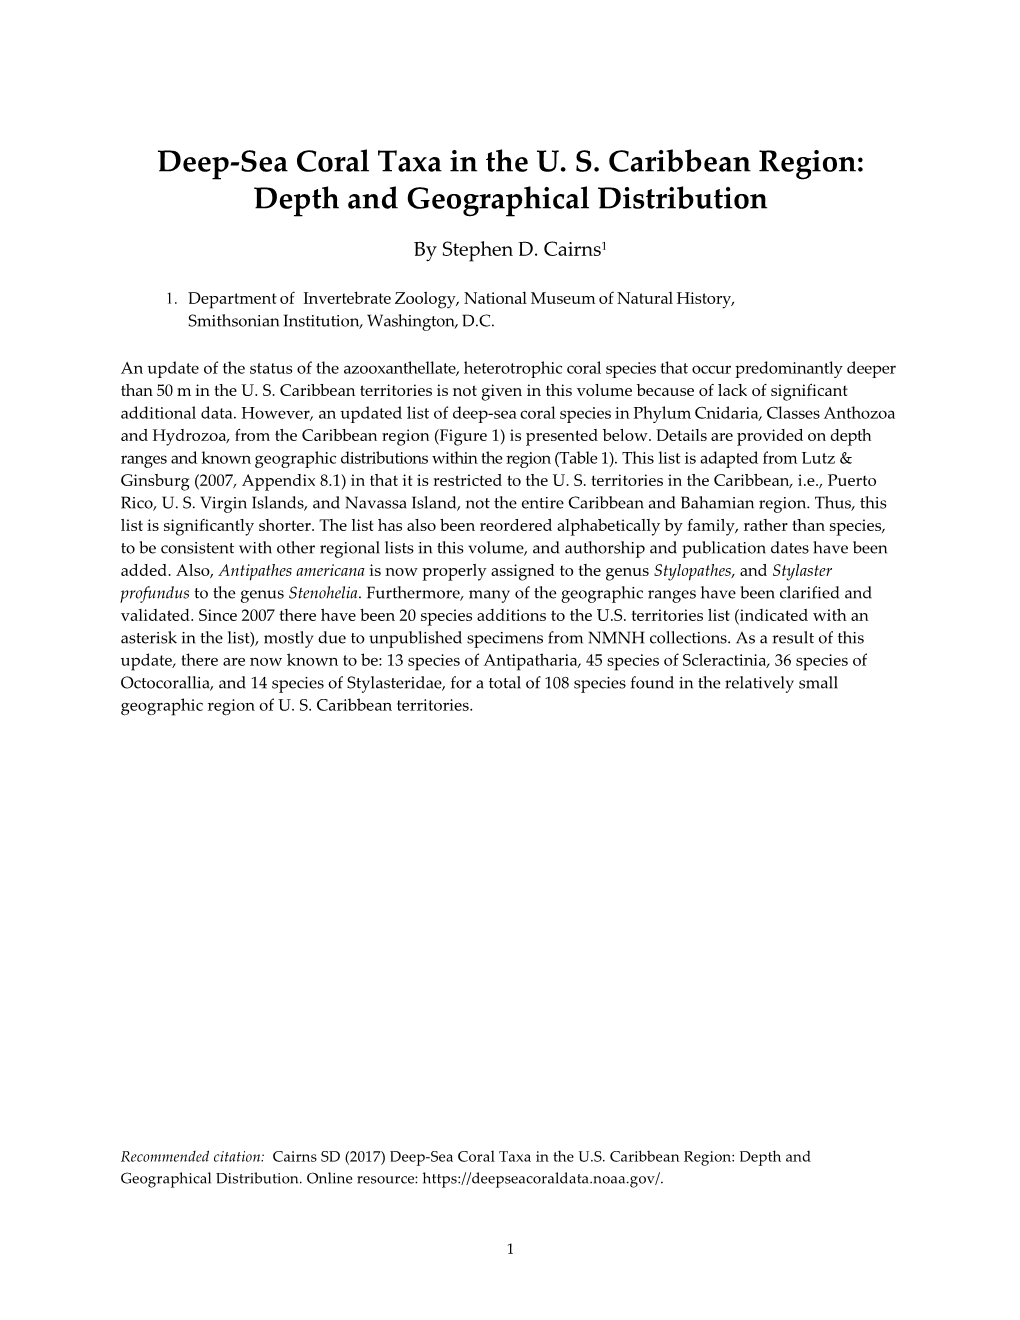 Deep-Sea Coral Taxa in the U. S. Caribbean Region: Depth and Geographical Distribution